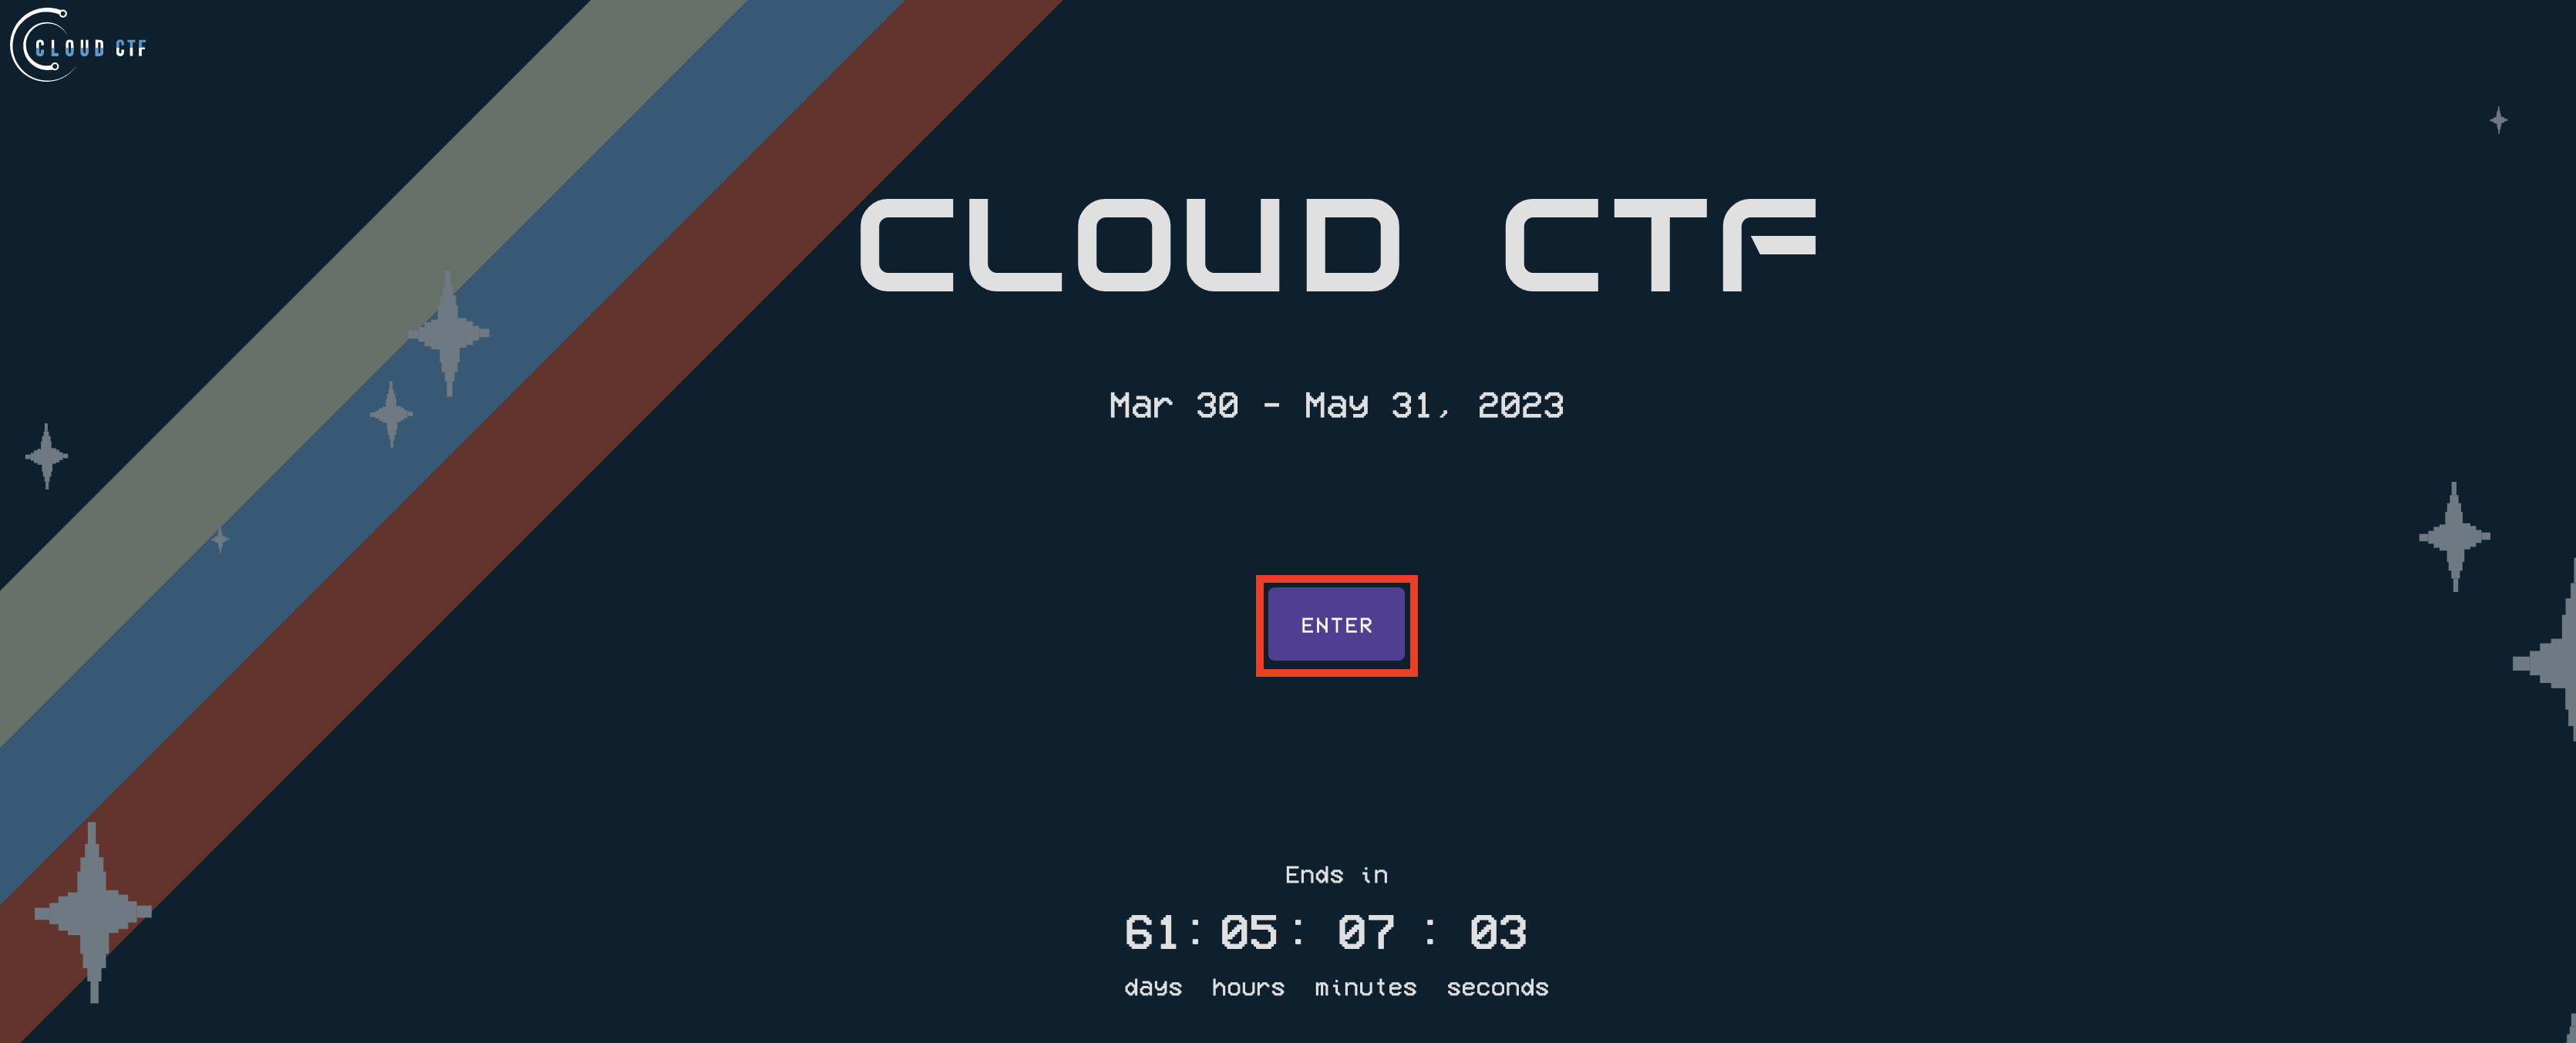 Here, underneath the dates of your CloudCTF, in the middle of the screen, you can click the start button to join a team and begin the competition.